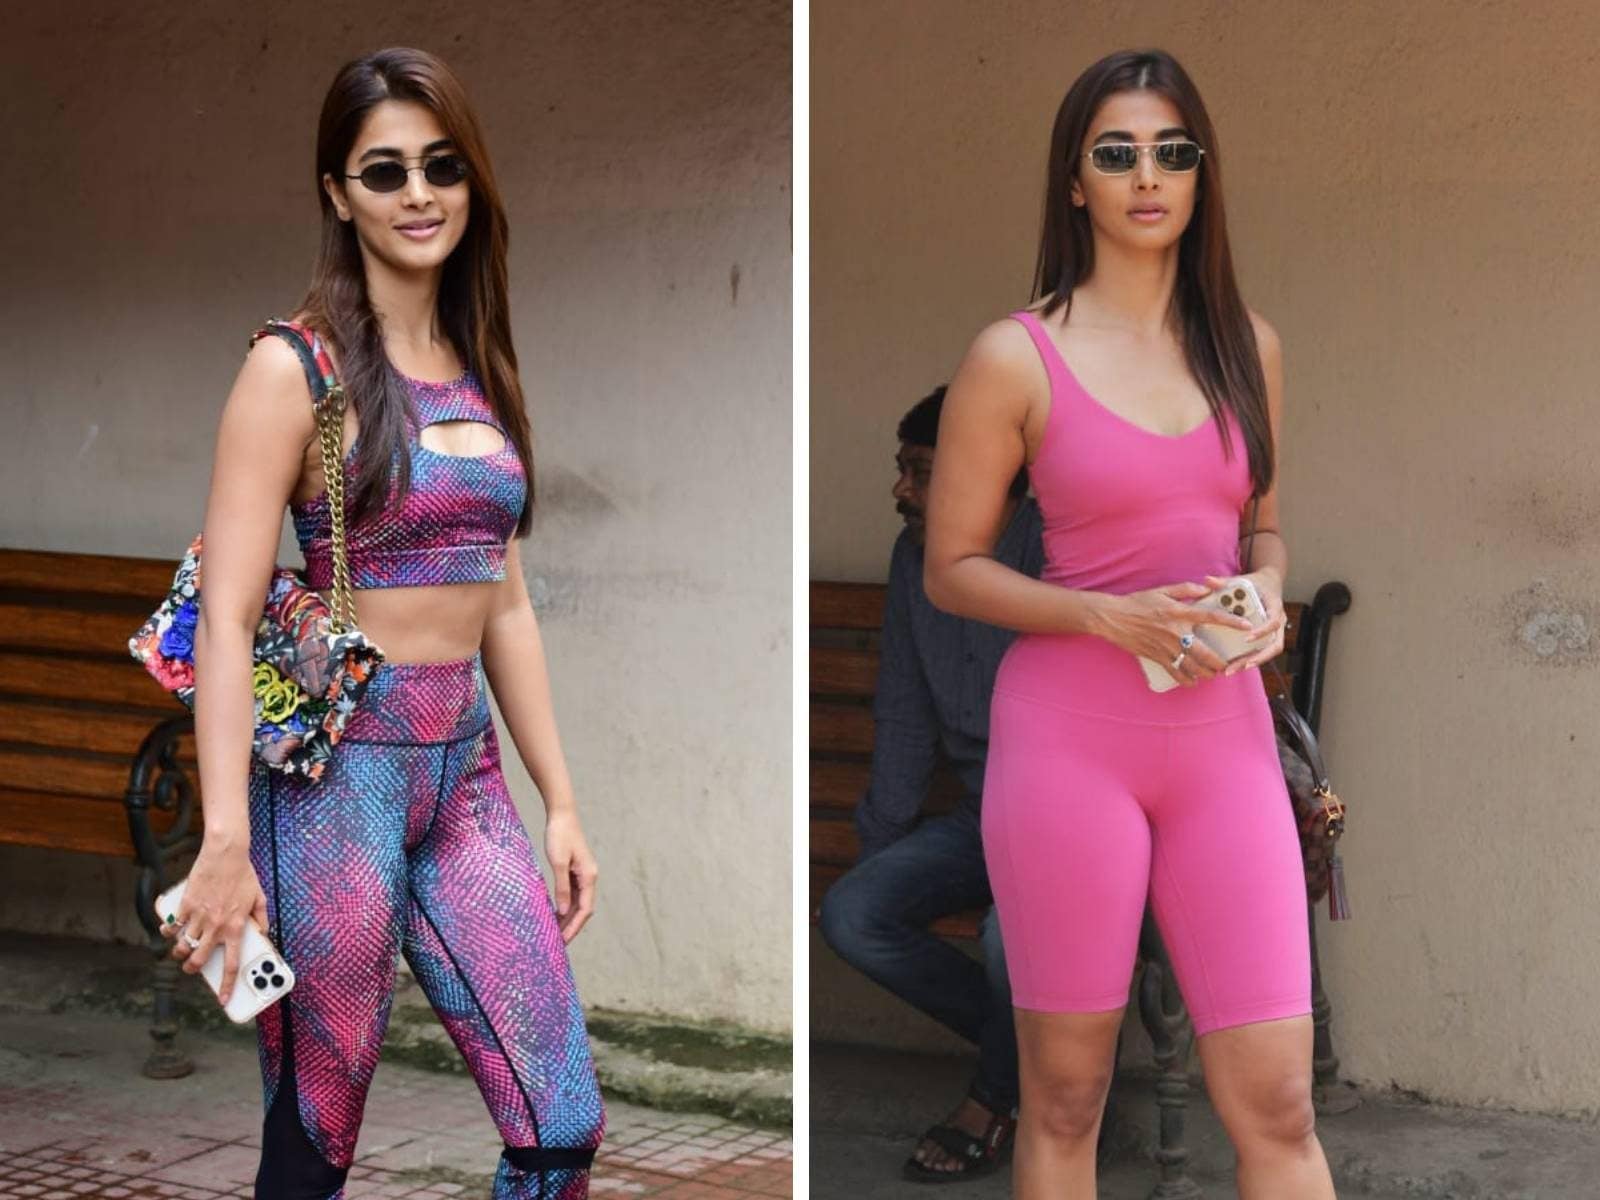 Radhe Shyam Starrer Pooja Hegde Is The Fitness Inspiration We Need Today In  Her Ridiculously Fit Sports Bra And Gym Tights